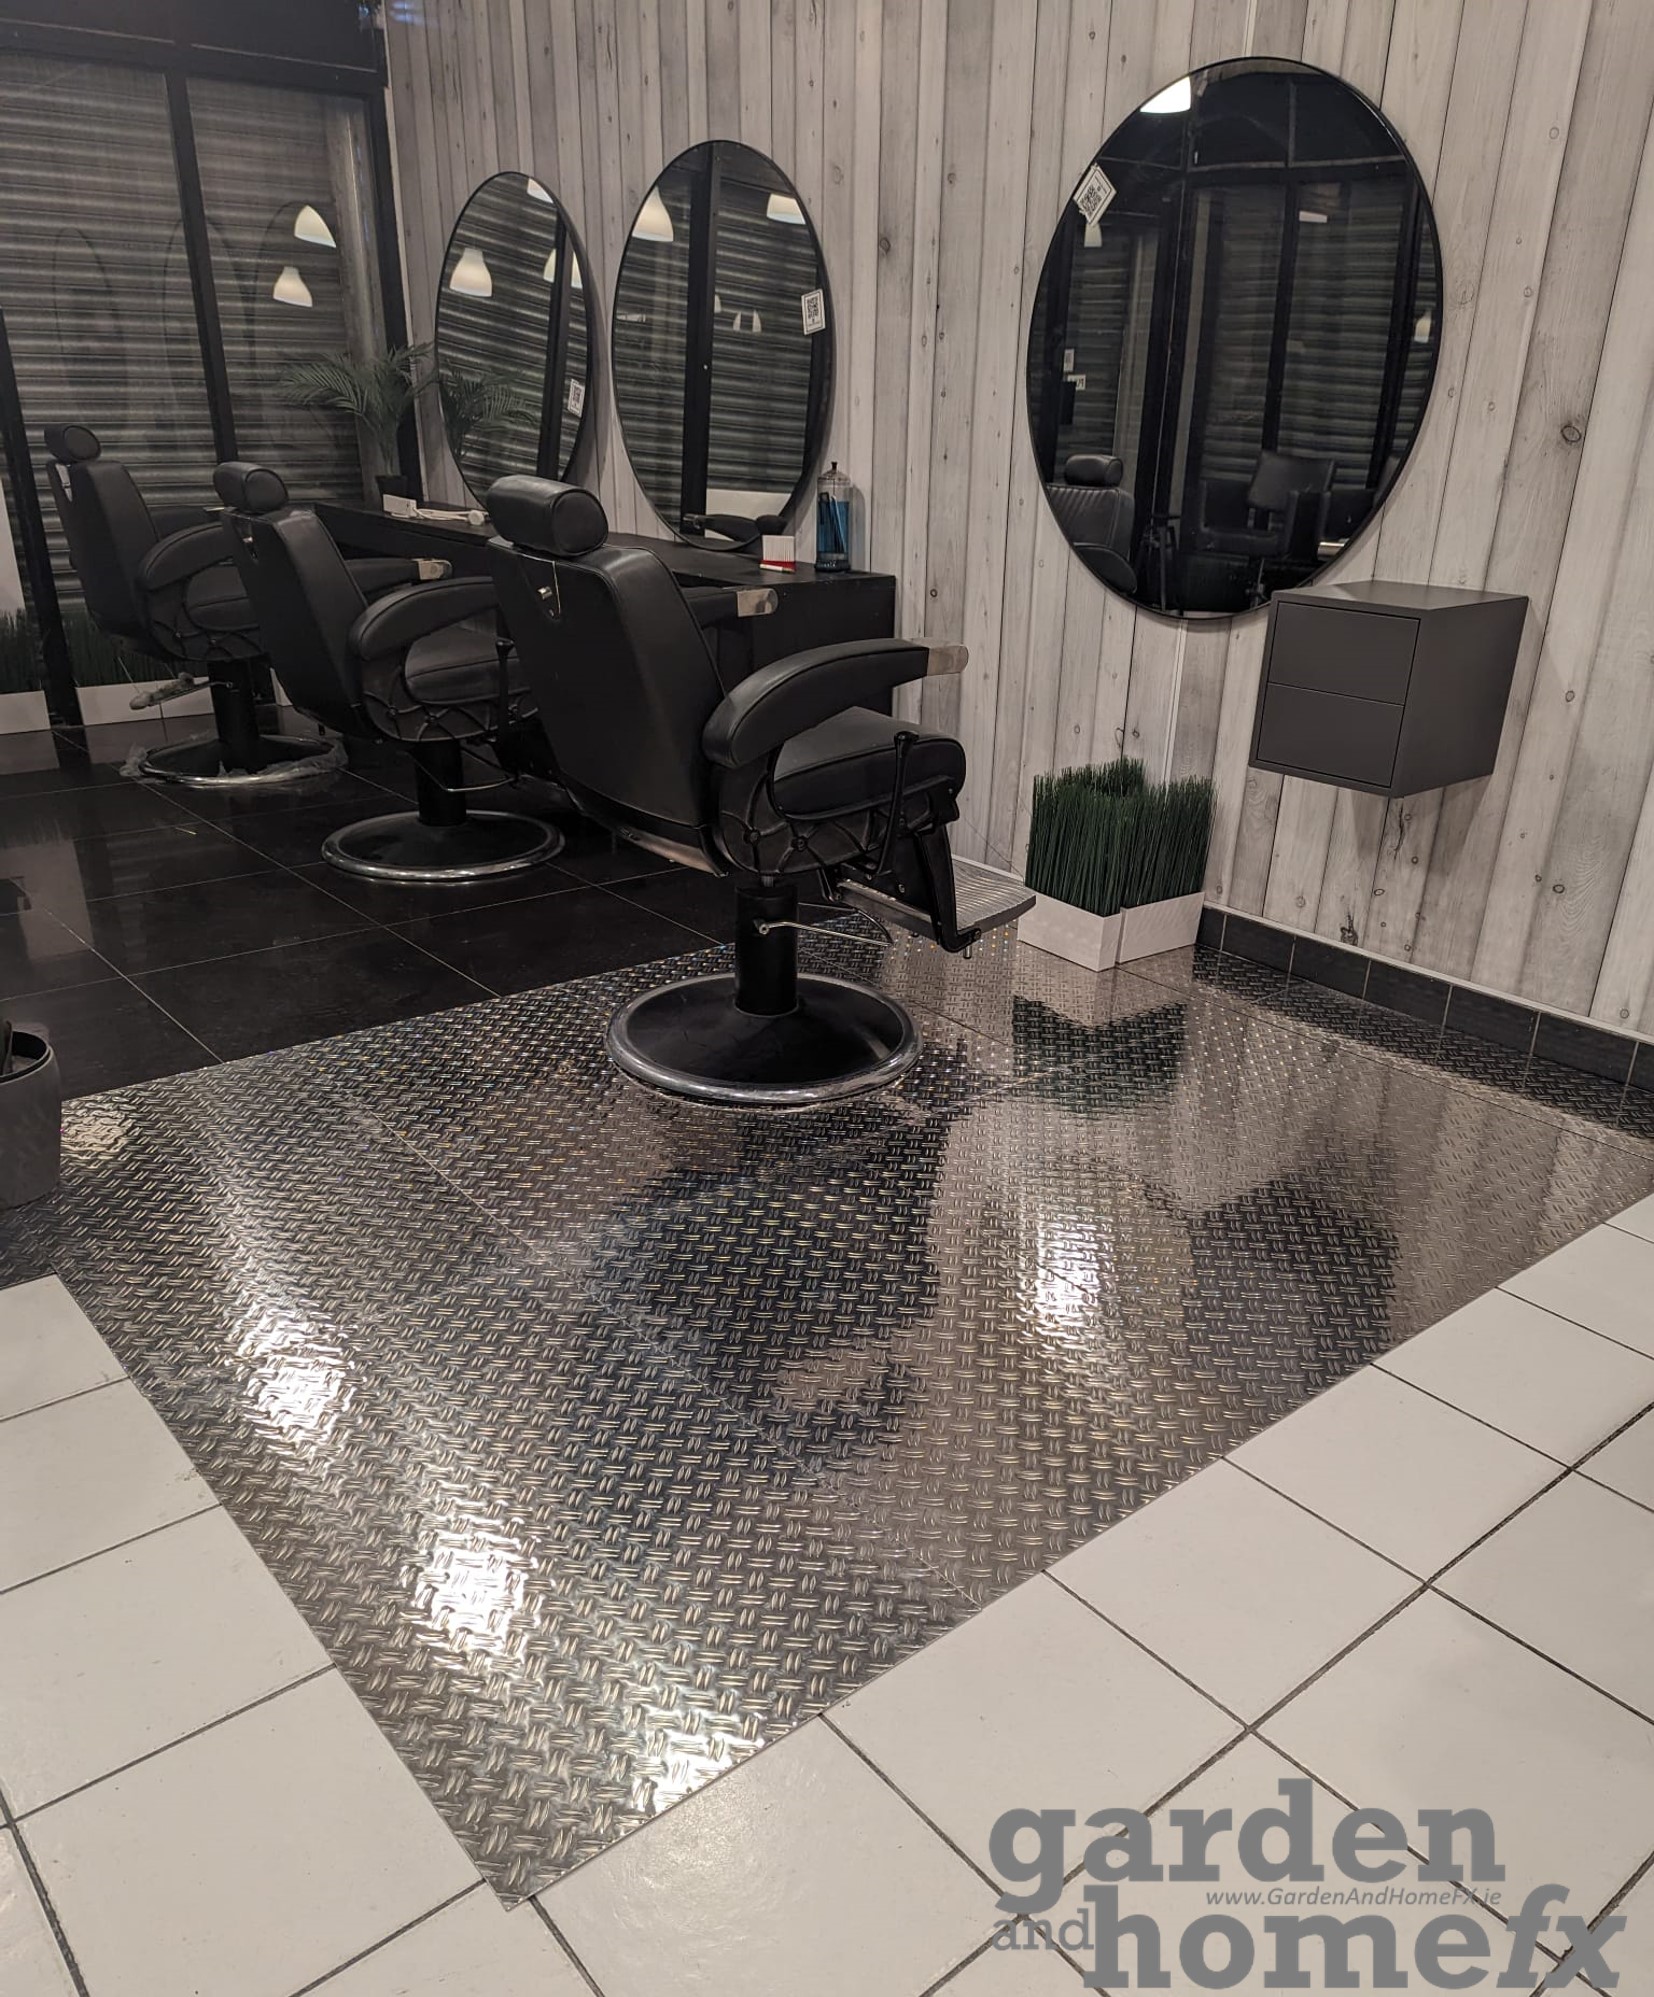 chequer or checker plate DIY panels used as flooring in "The Barbers Union" firhouse, Dublin. www.GardenandHomeFX.ie